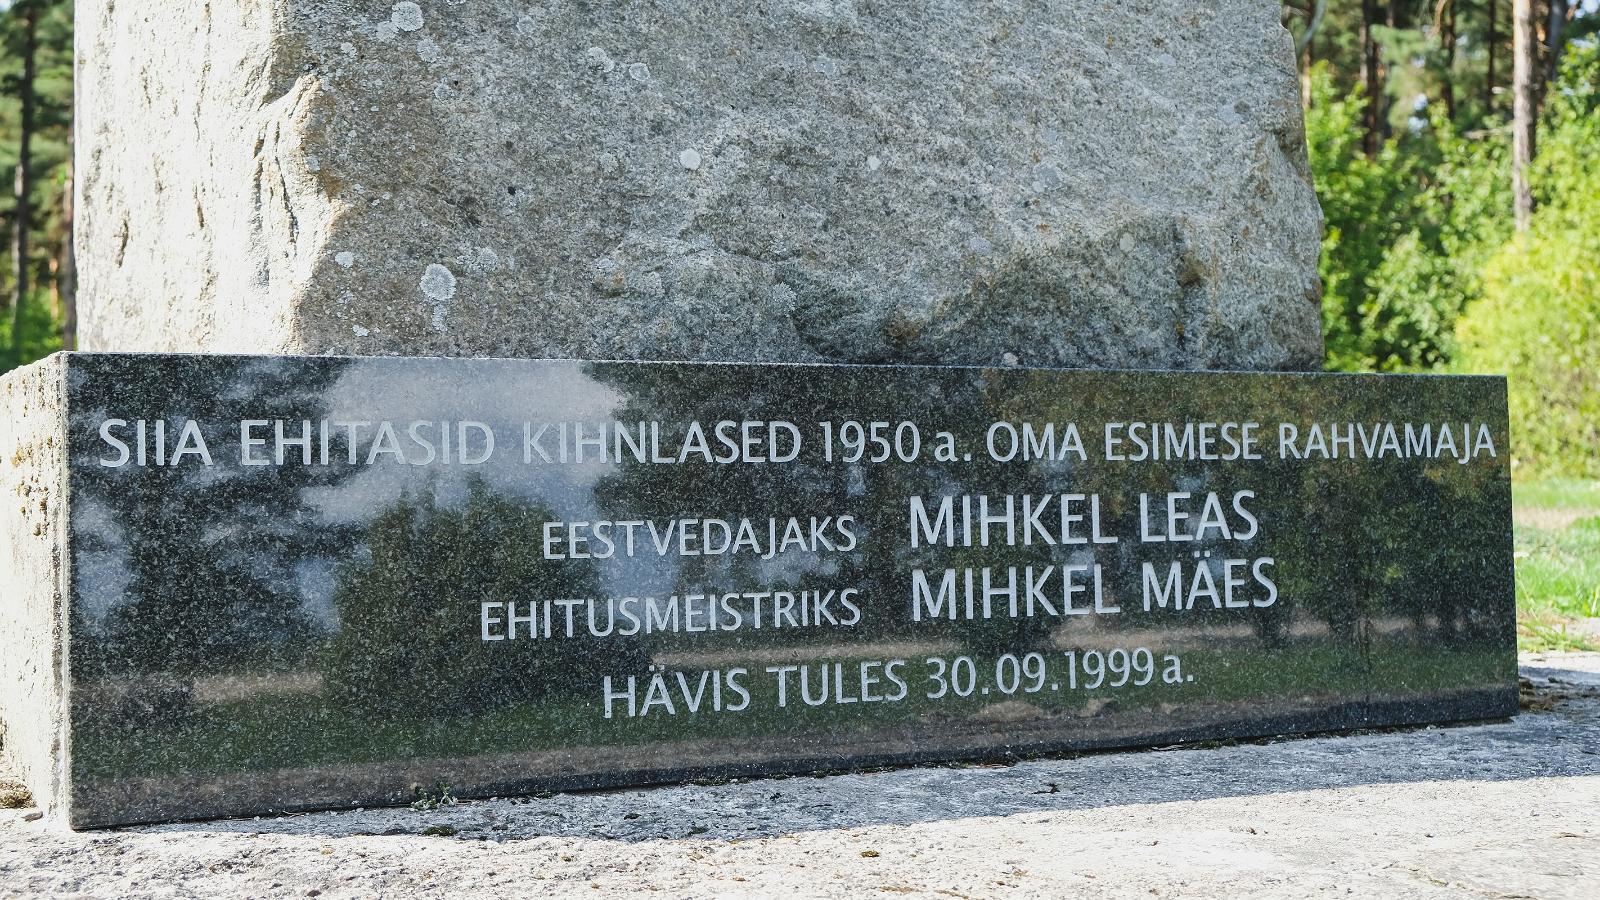 Monument to the former community centre of Kihnu